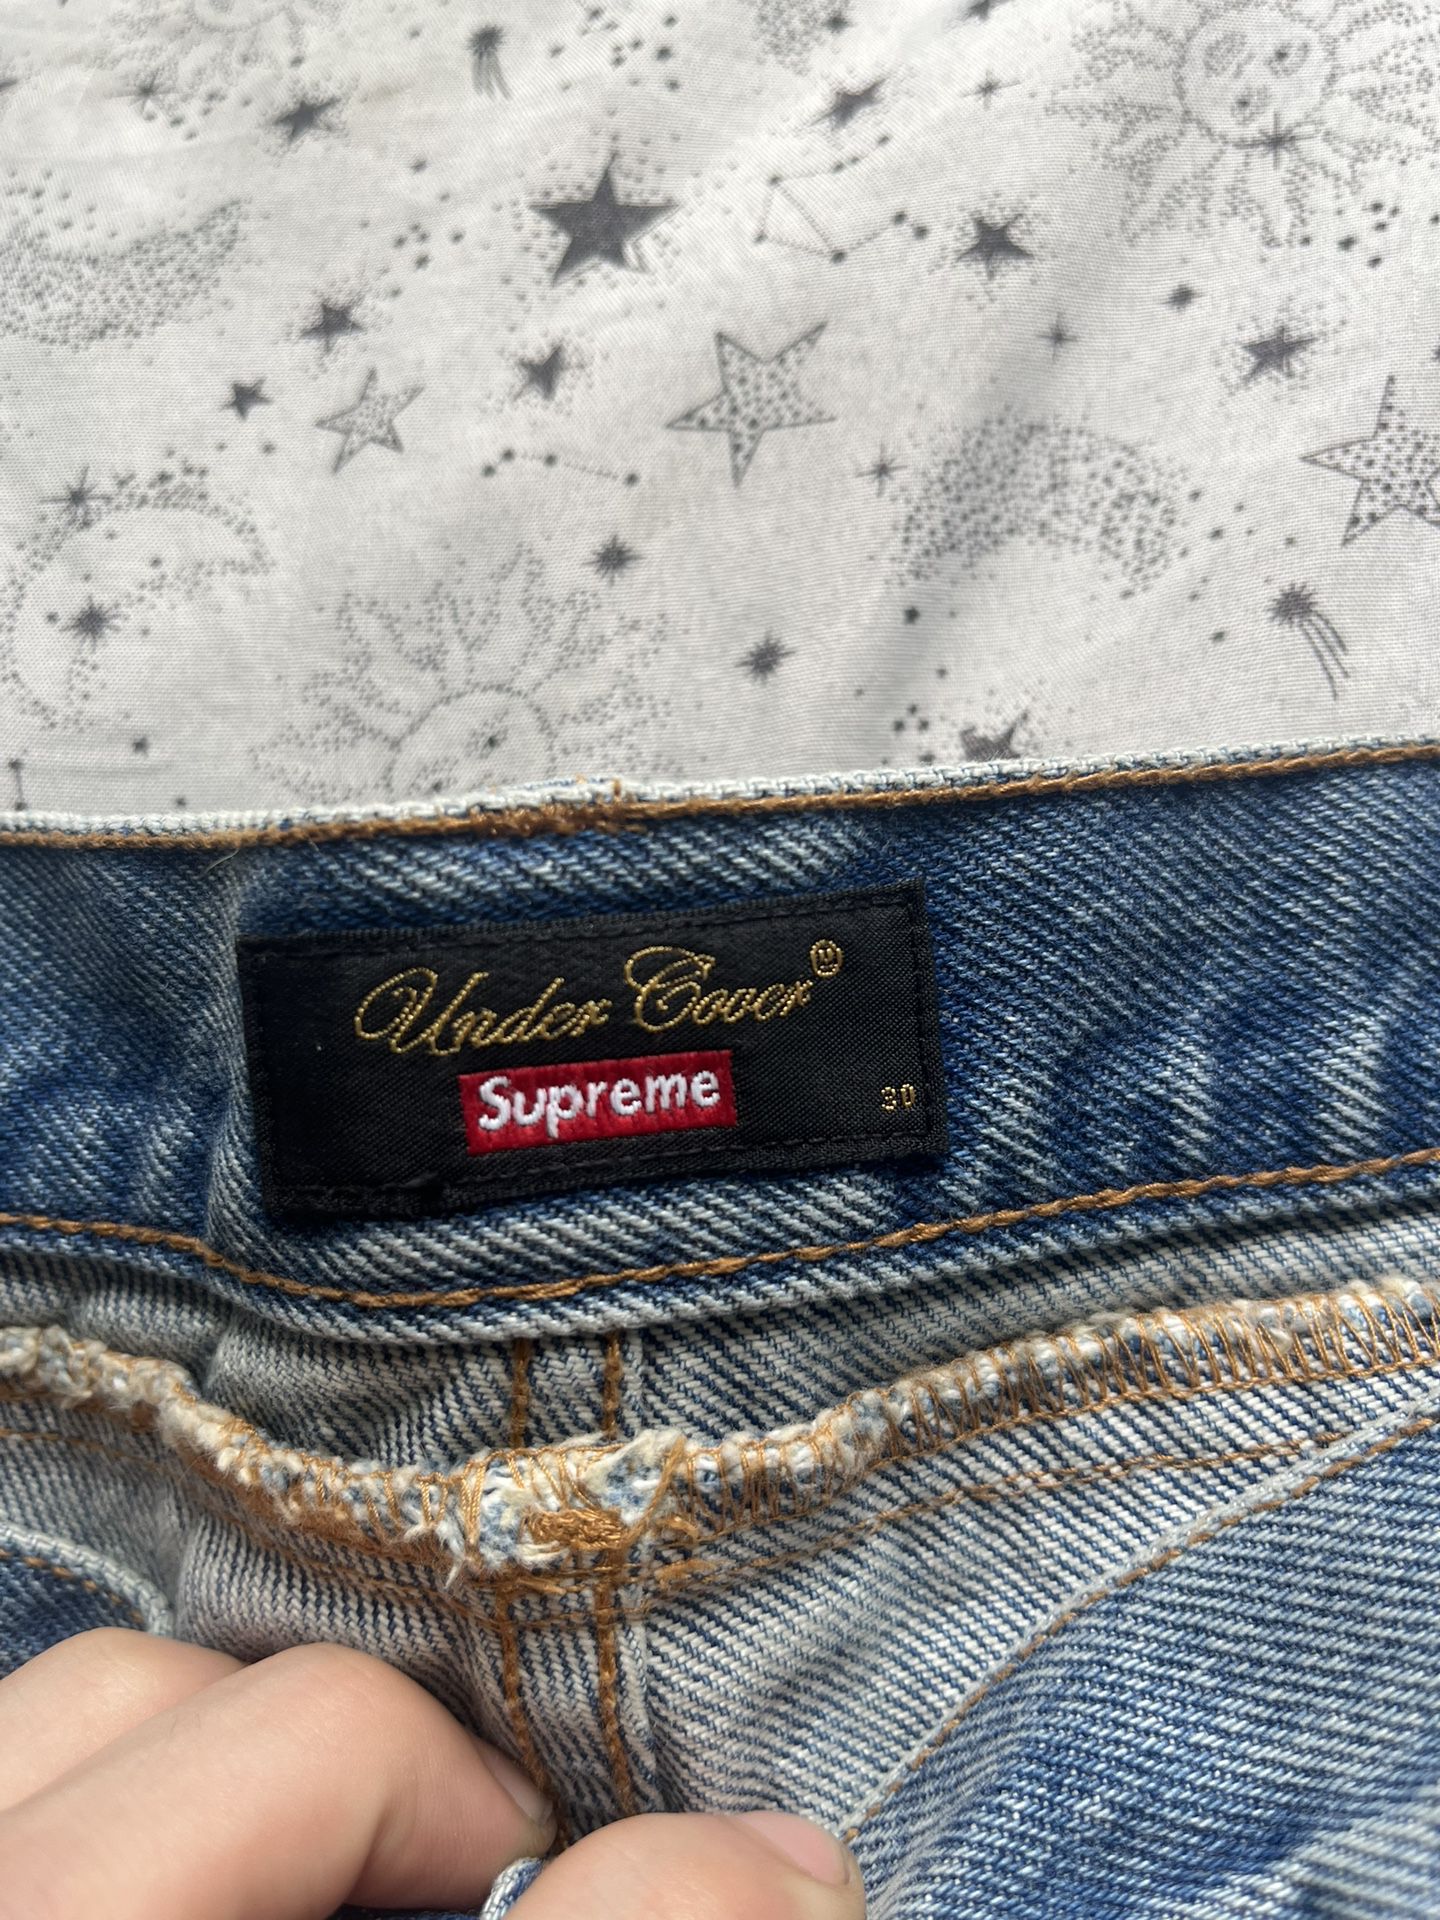 Supreme Undercover Layered Jeans for Sale in Los Angeles, CA - OfferUp